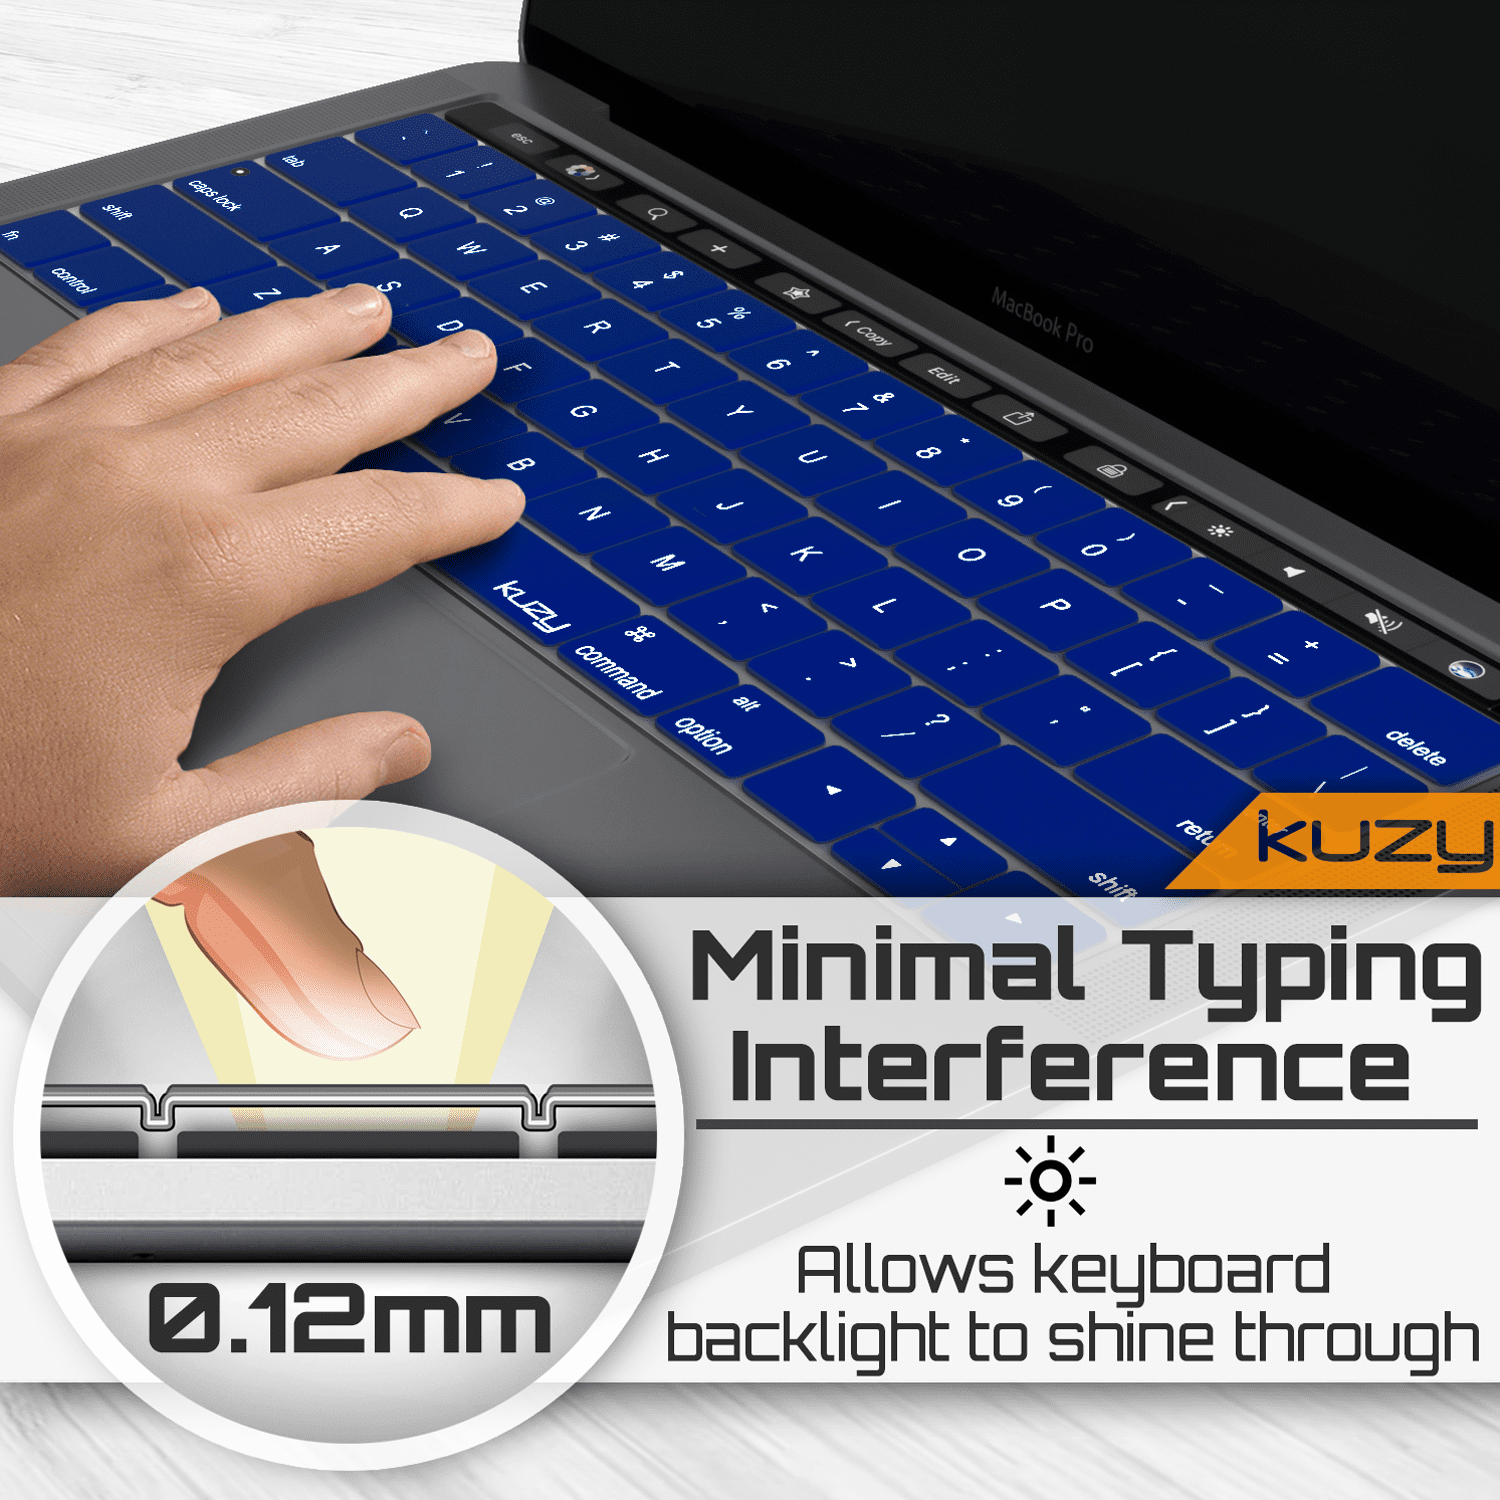 2019 2018 2017 2016 Released Model A2159 A1989 A1706 A1990 A1707 Masino Silicone Keyboard Cover for MacBook Pro with Touch Bar 13 15 inch Taiwan Traditional Chinese Characters,Black 